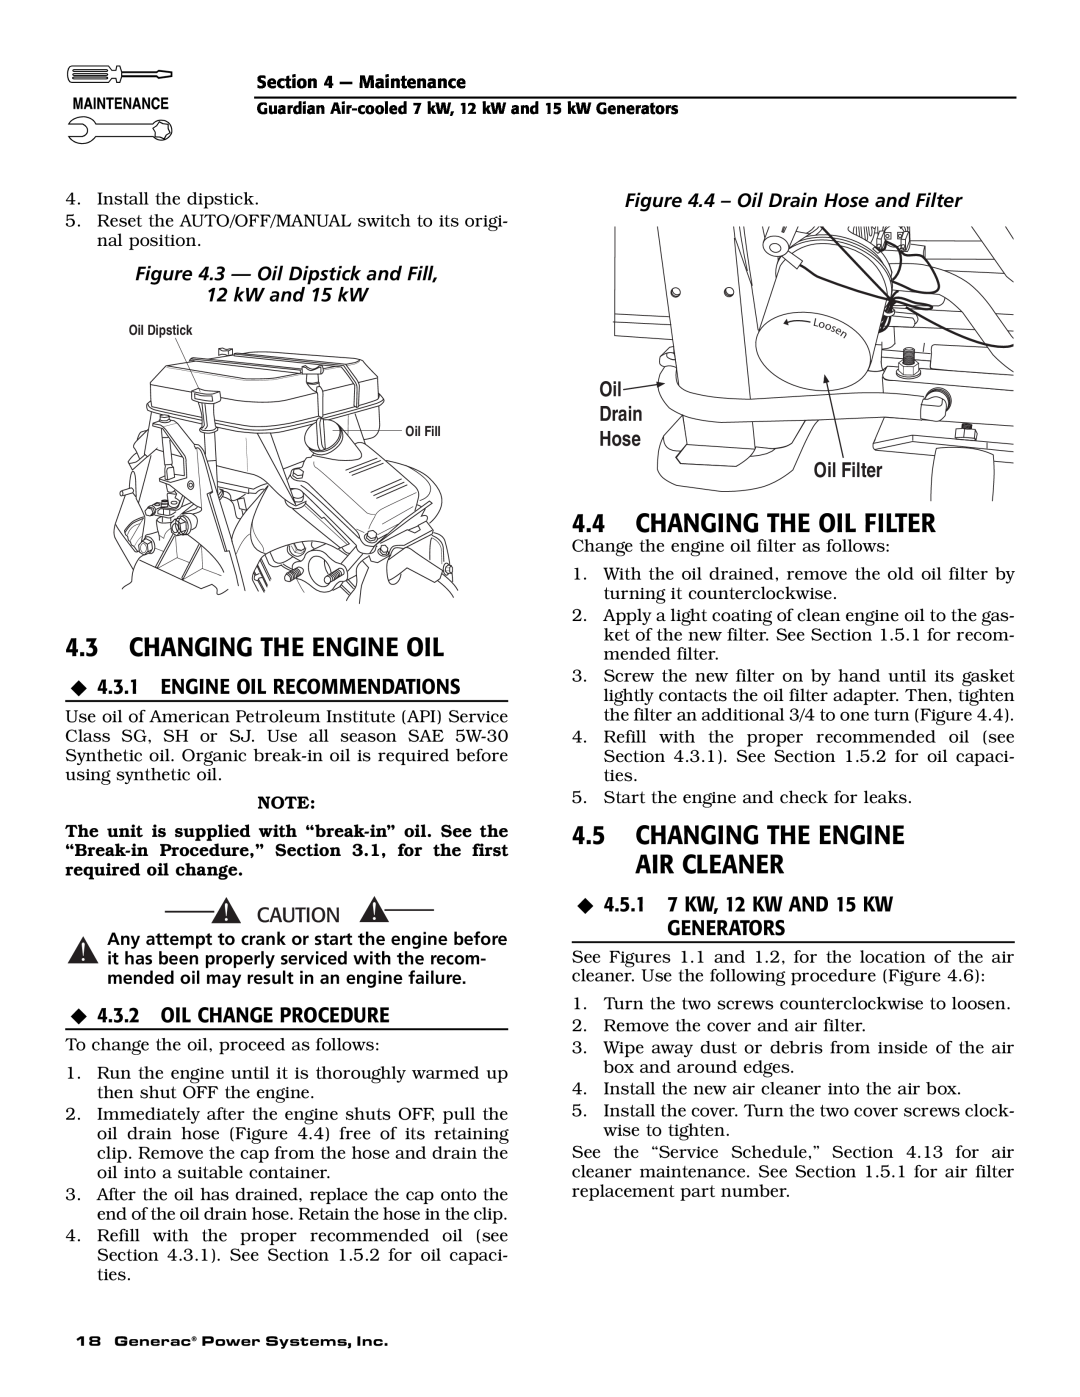 Guardian Technologies 04758-2, 04759-2, 04760-2 owner manual Changing The Engine Oil, Changing The Oil Filter 